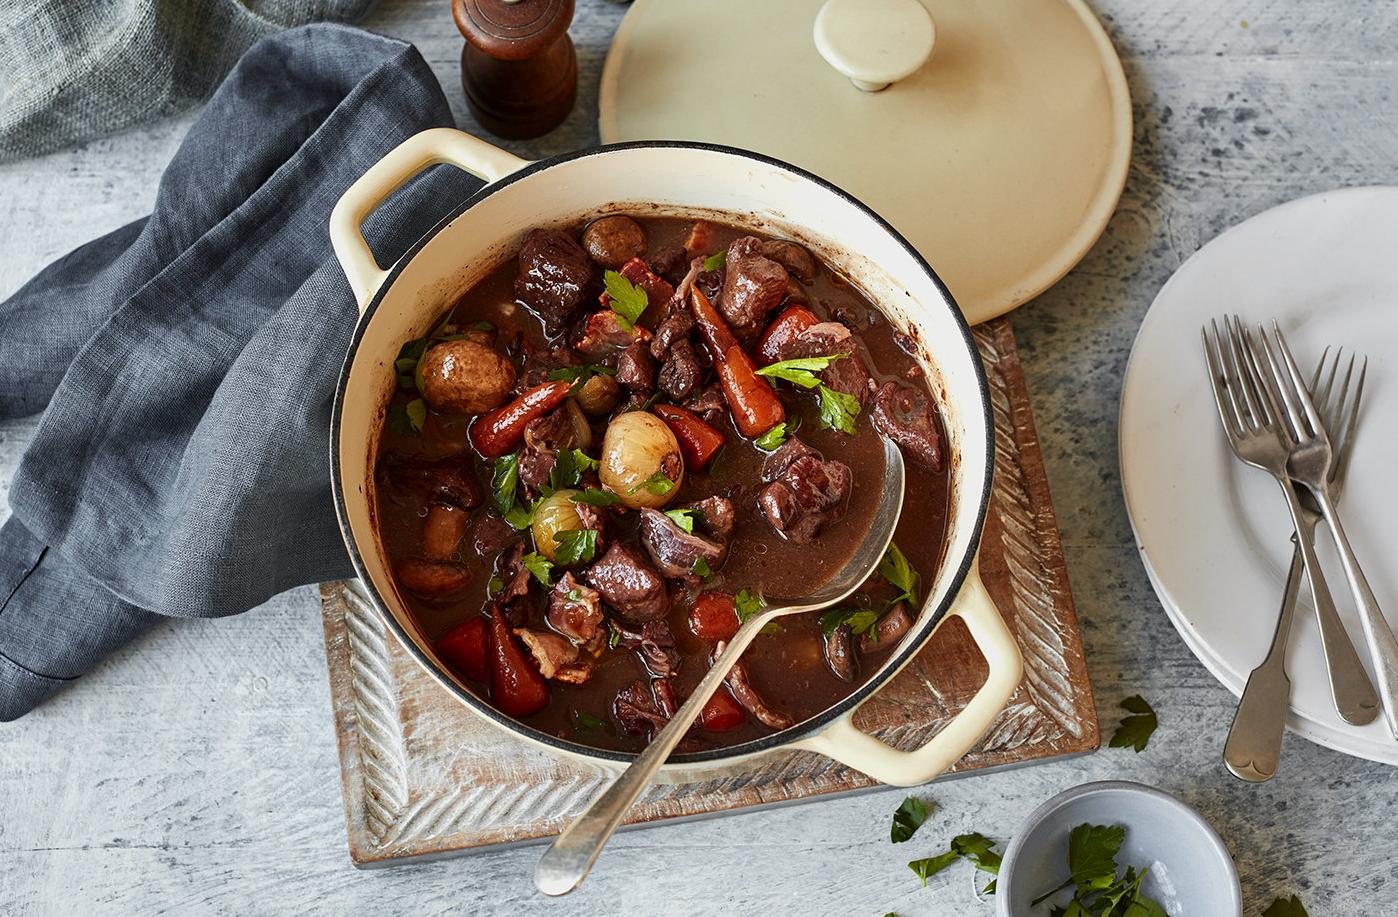  Tender beef, mixed vegetables, and a savory broth make this stew a comforting classic